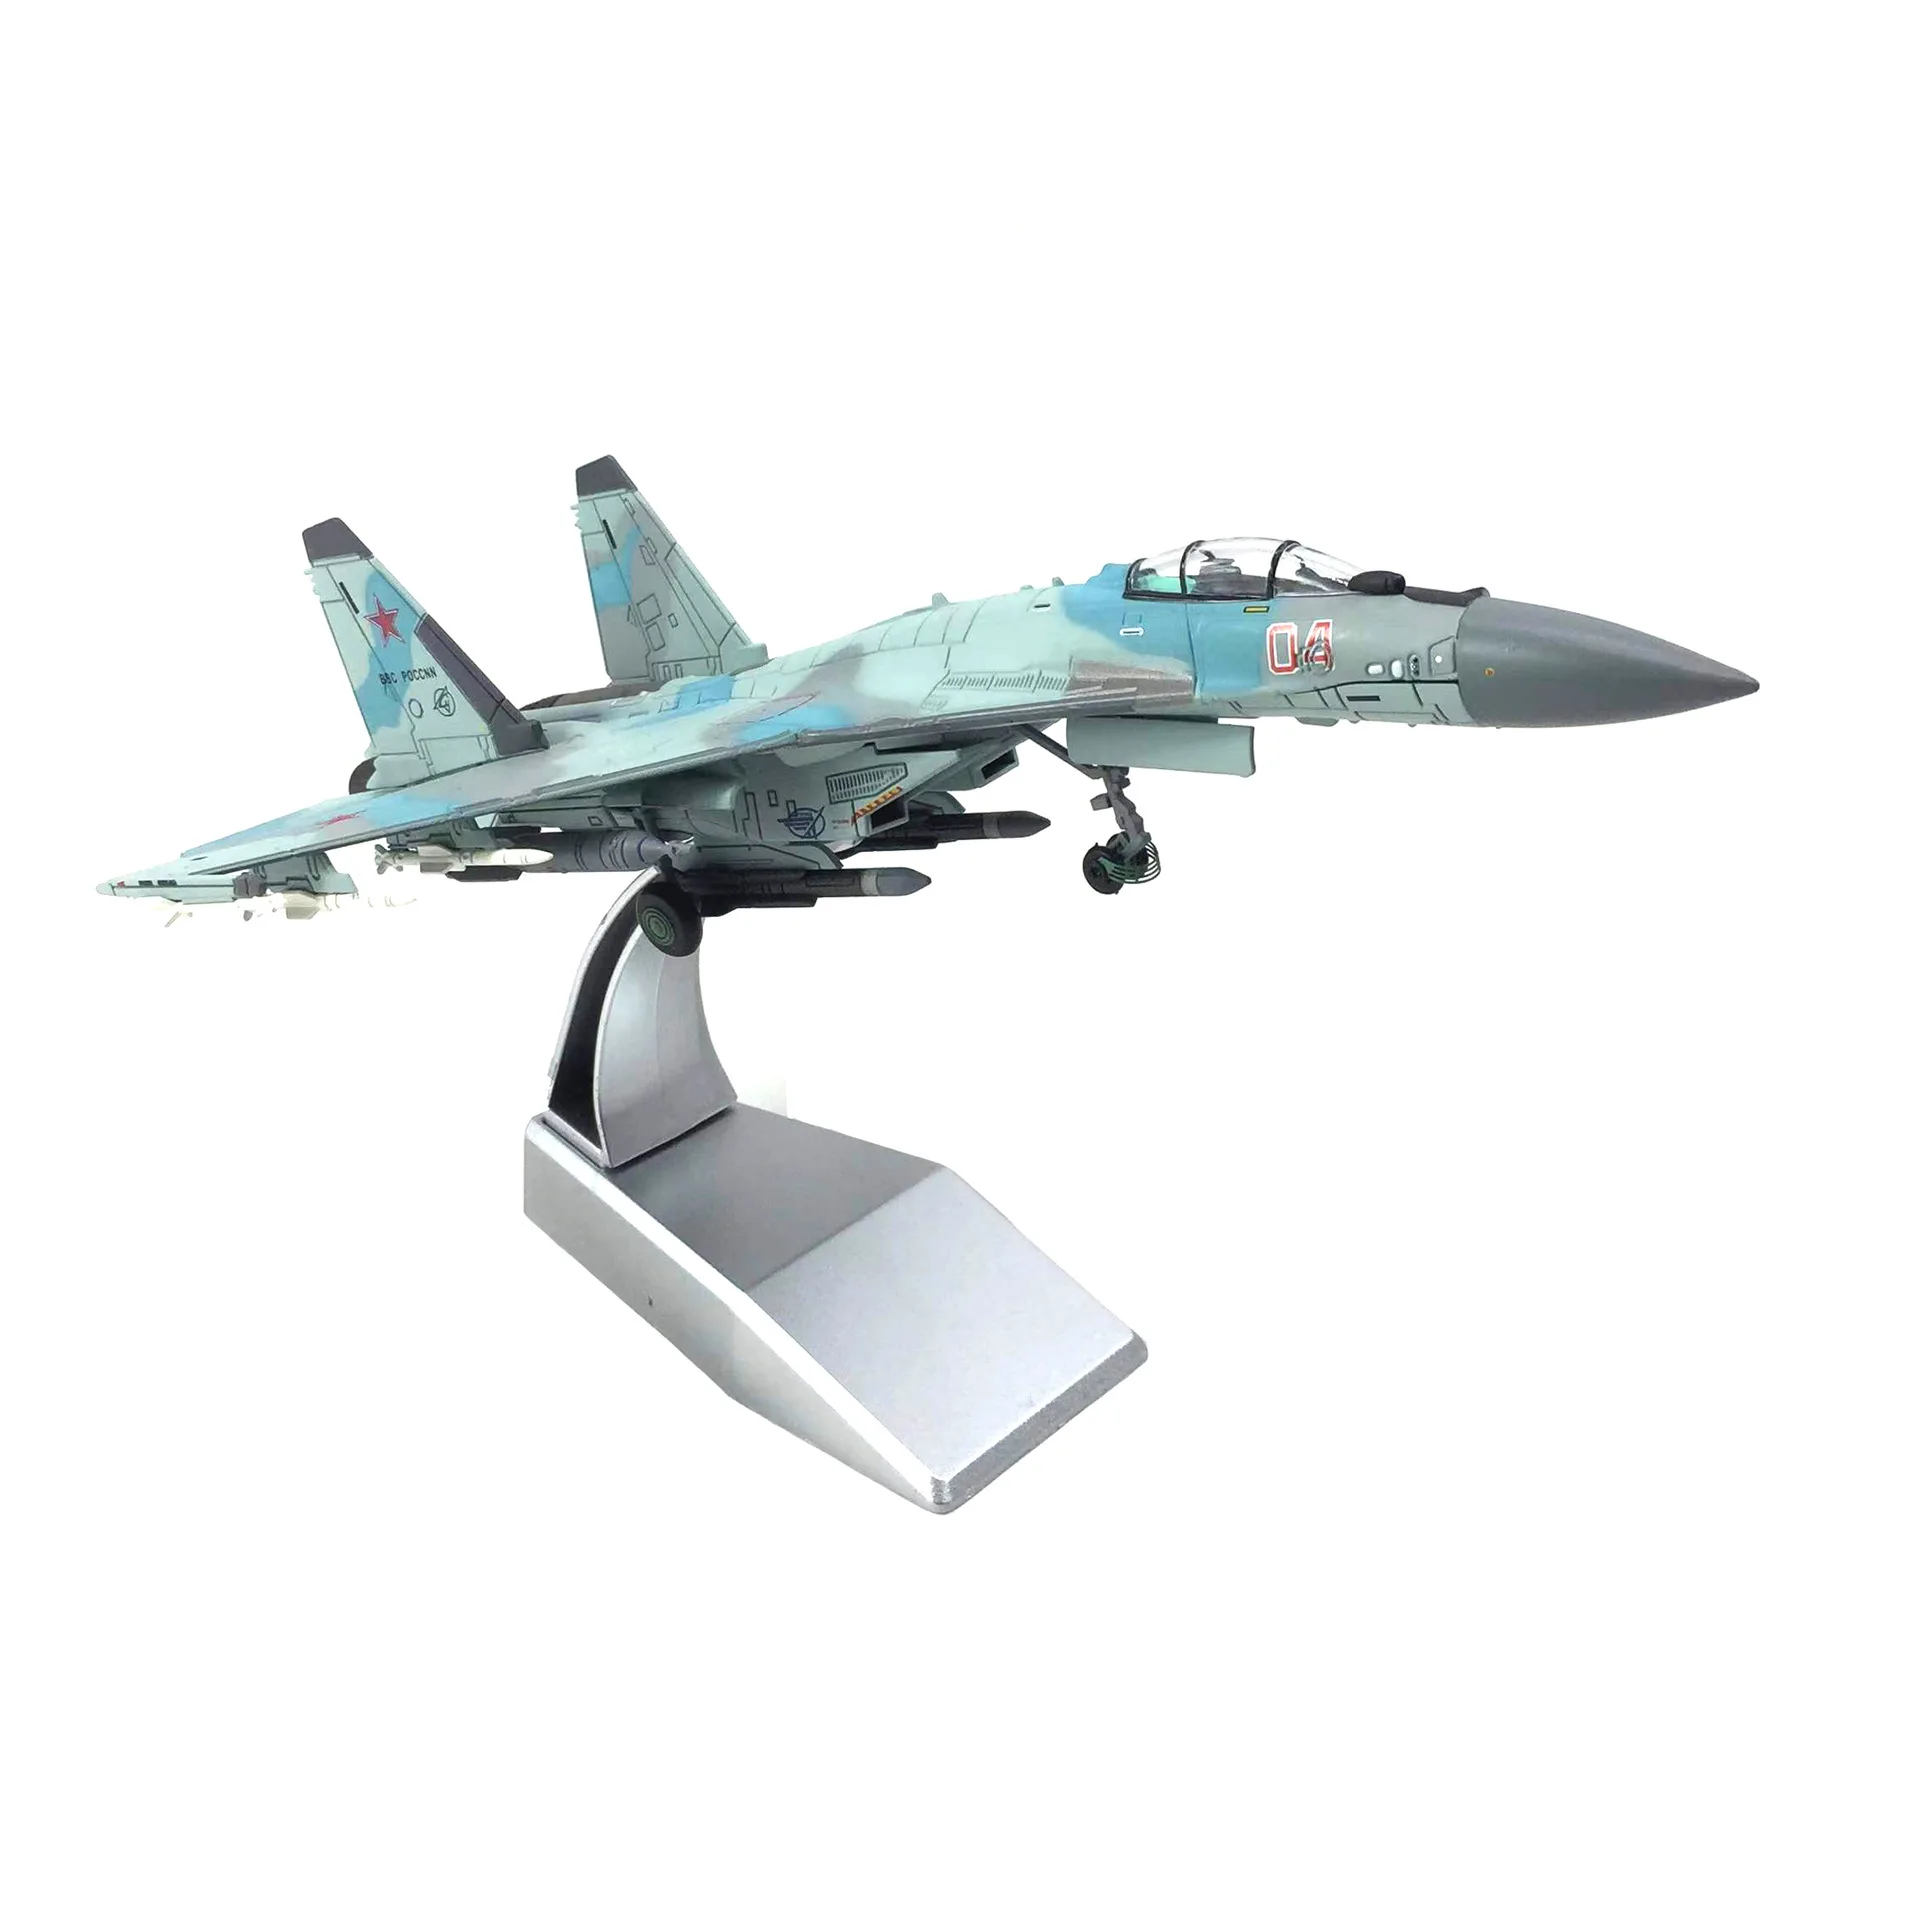 

TOY GODS 1/100 Scale Sukhoi SU-35 Flanker-E Multi-role Fighter Diecast Metal Military Plane Model Toy For Gift,Collection